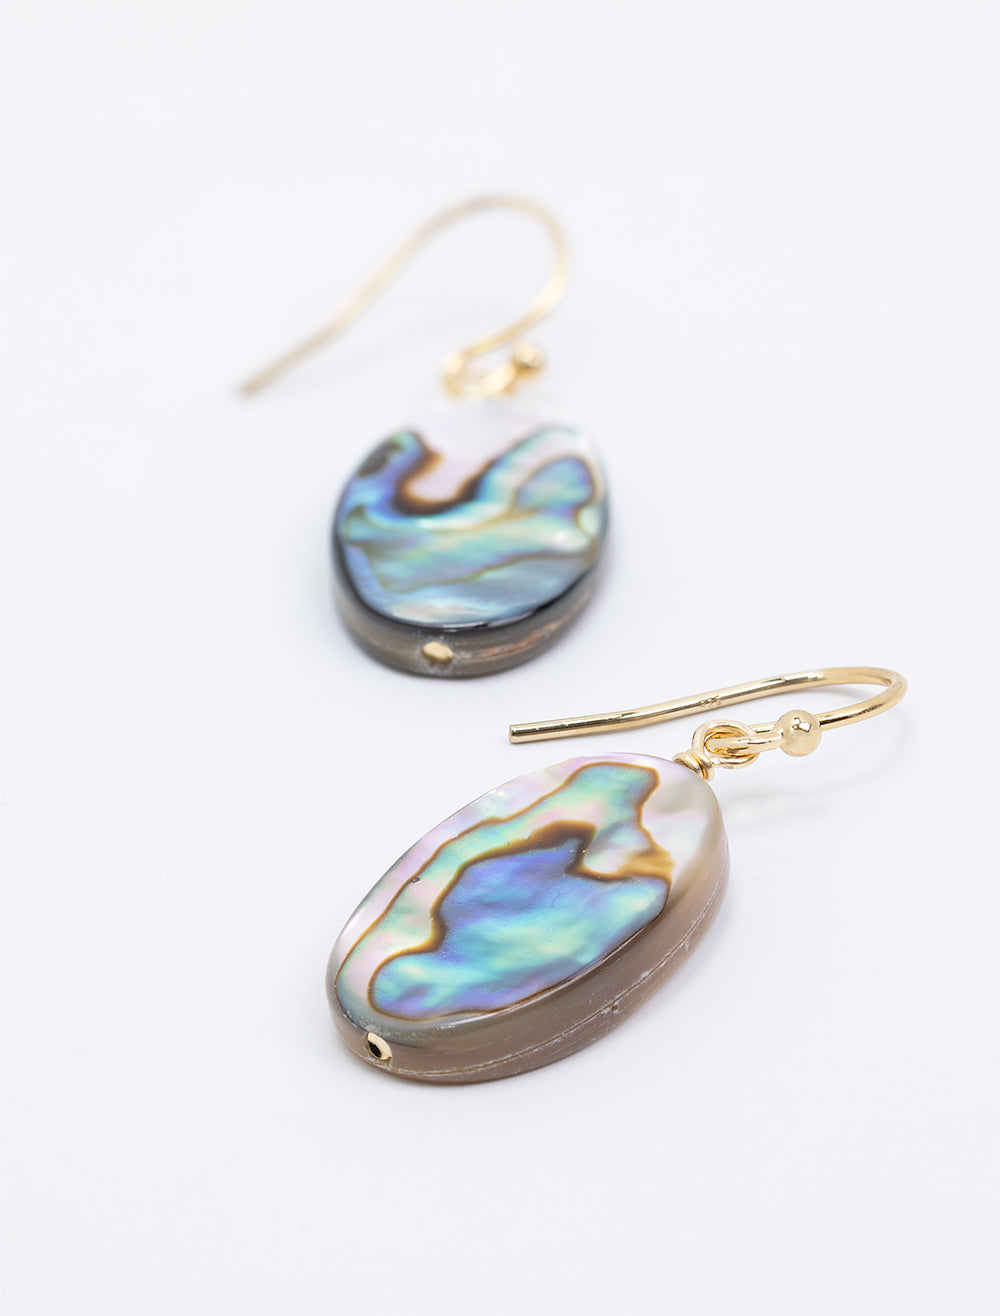 Close-up laydown of AV Max's oval abalone and mother of pearl earrings.